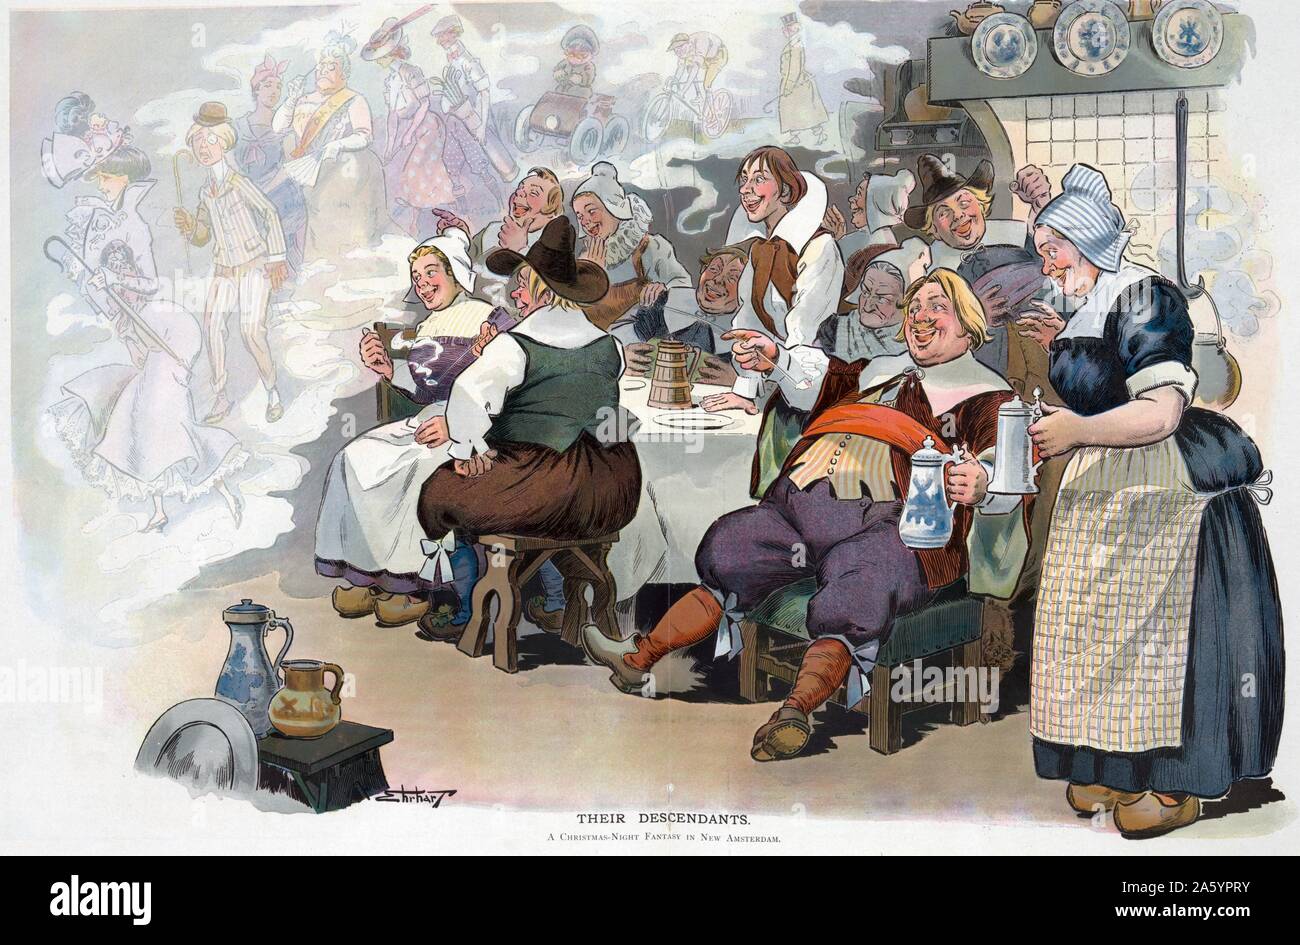 Their descendants by artist Samuel D. Ehrhart approx. 1862-1937. Illustration shows Dutch settlers in 'New Amsterdam' (New York) chuckling over drink at the shades of their future descendants (Victorian women, dandies, stern-looking members of the D.A.R., women golfing, and the automobile). Stock Photo